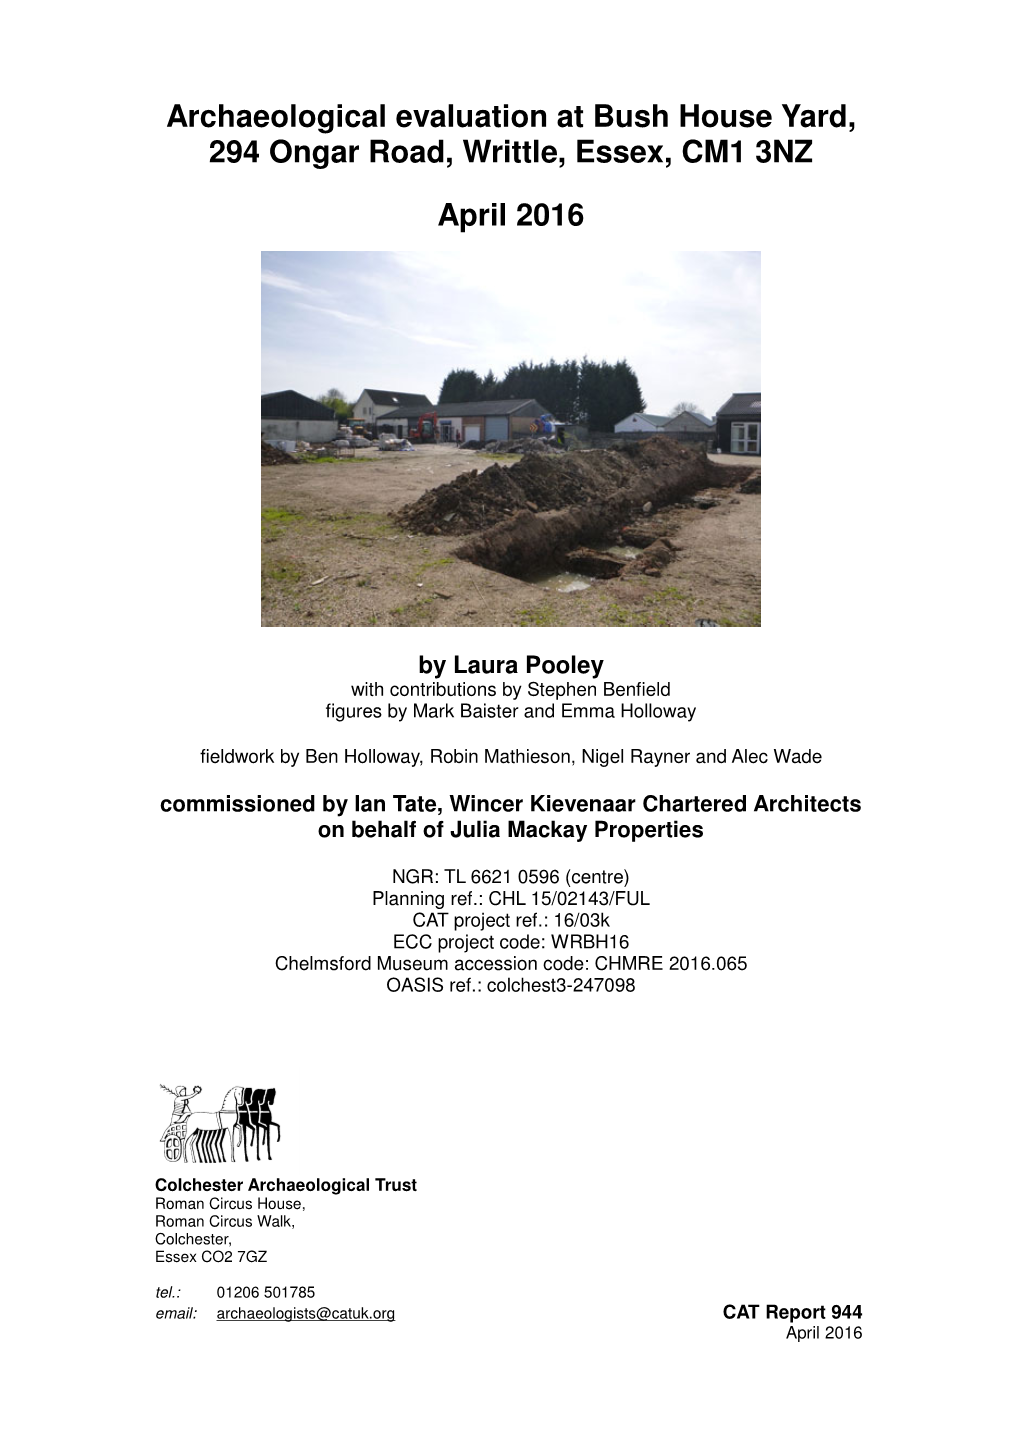 Archaeological Evaluation at Bush House Yard, 294 Ongar Road, Writtle, Essex, CM1 3NZ